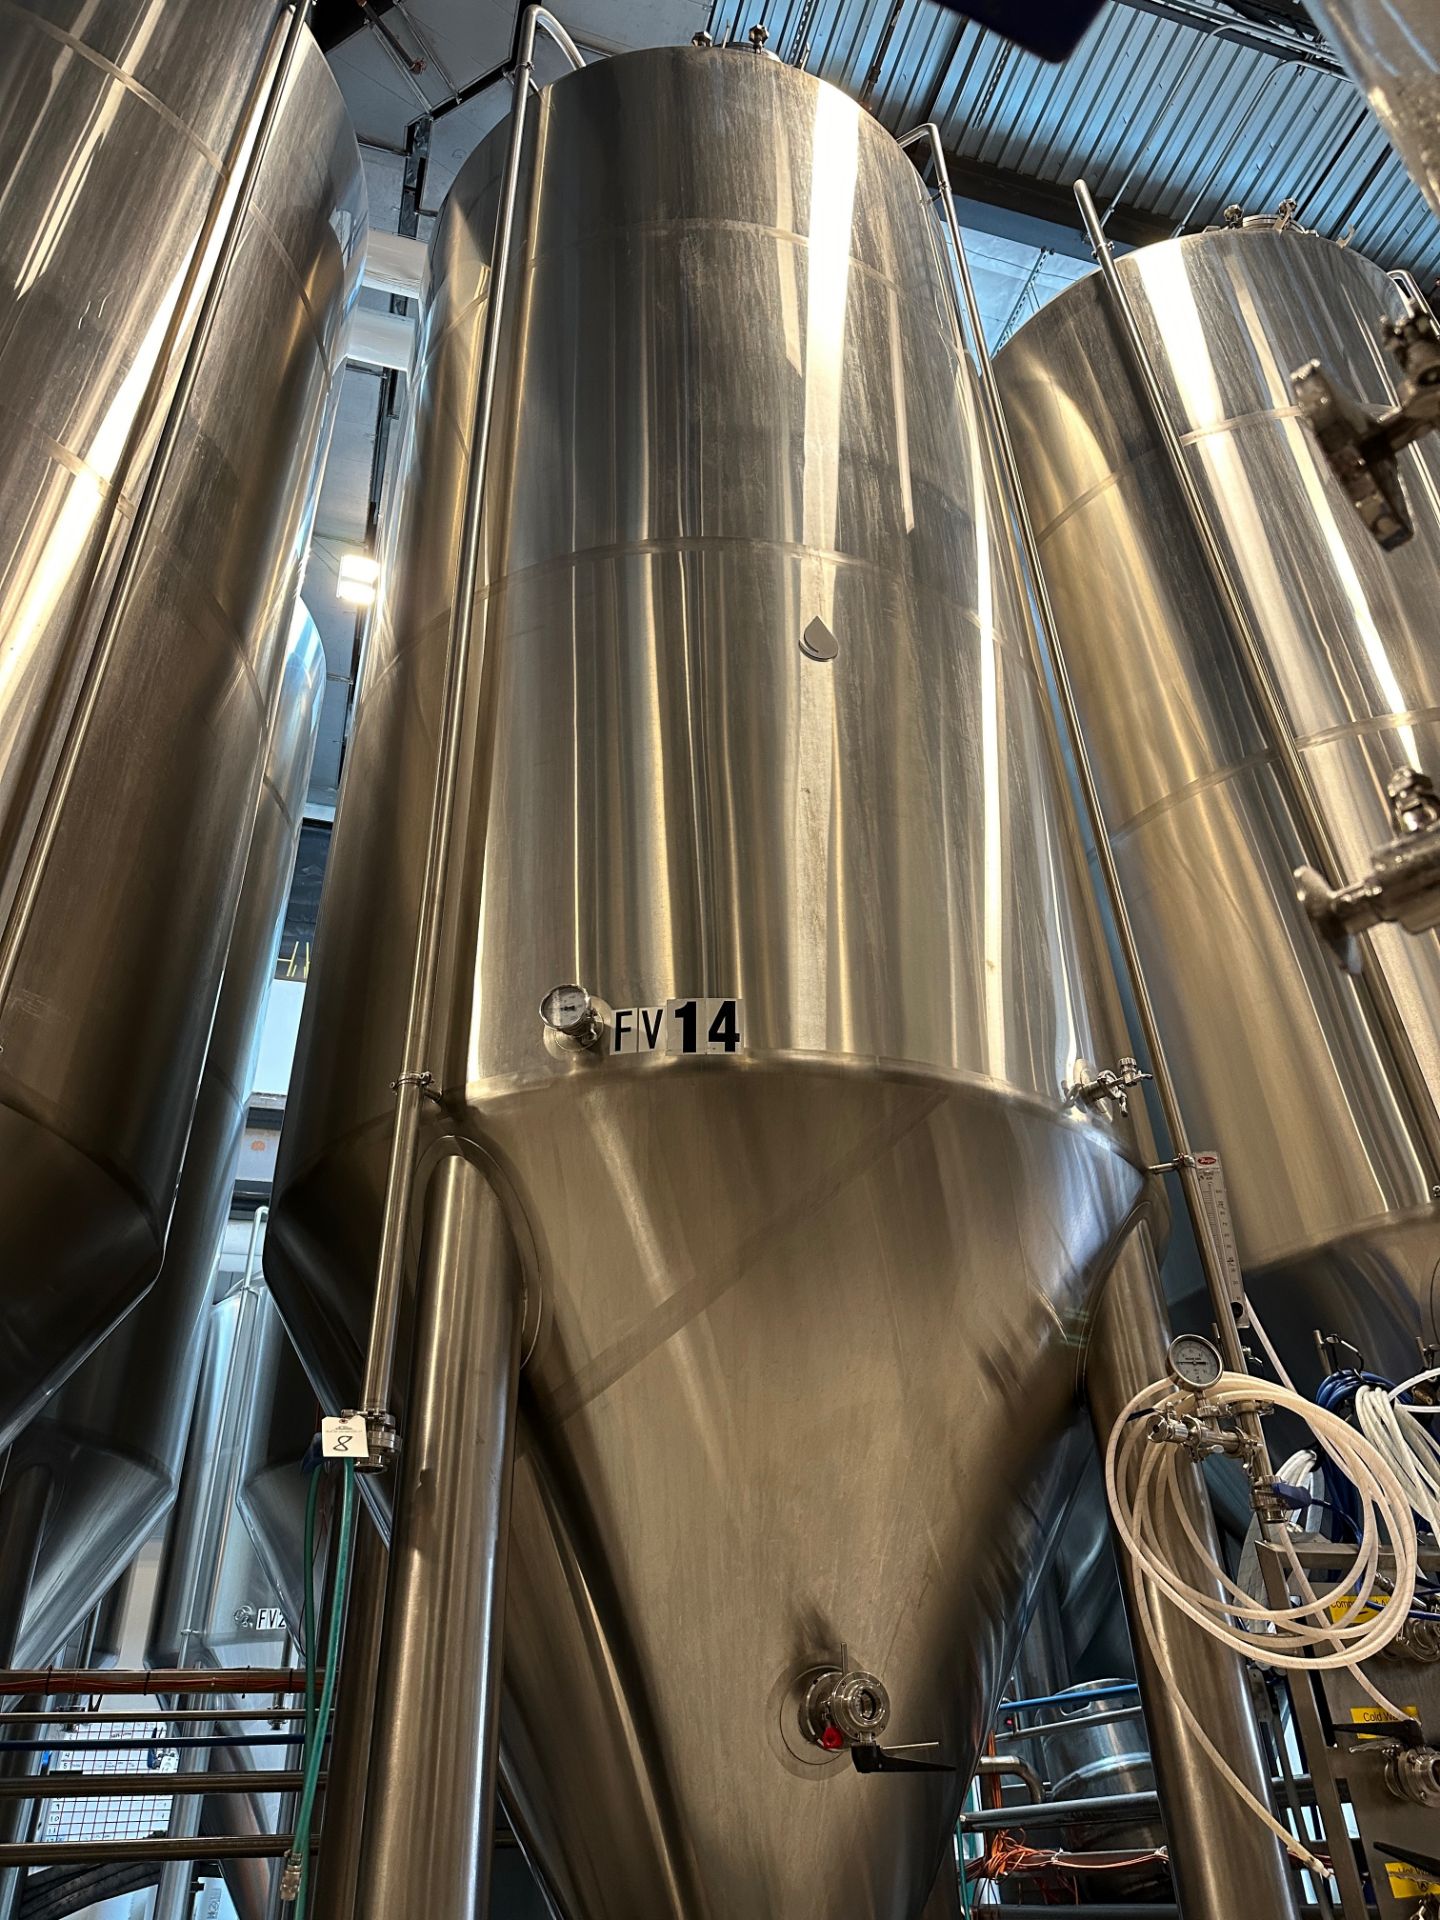 Complete 40 BBL Microbrewery - 40 BBL Deutsche 4-Vessel Brewhouse, Tanks, Can Line - See Description - Image 32 of 335